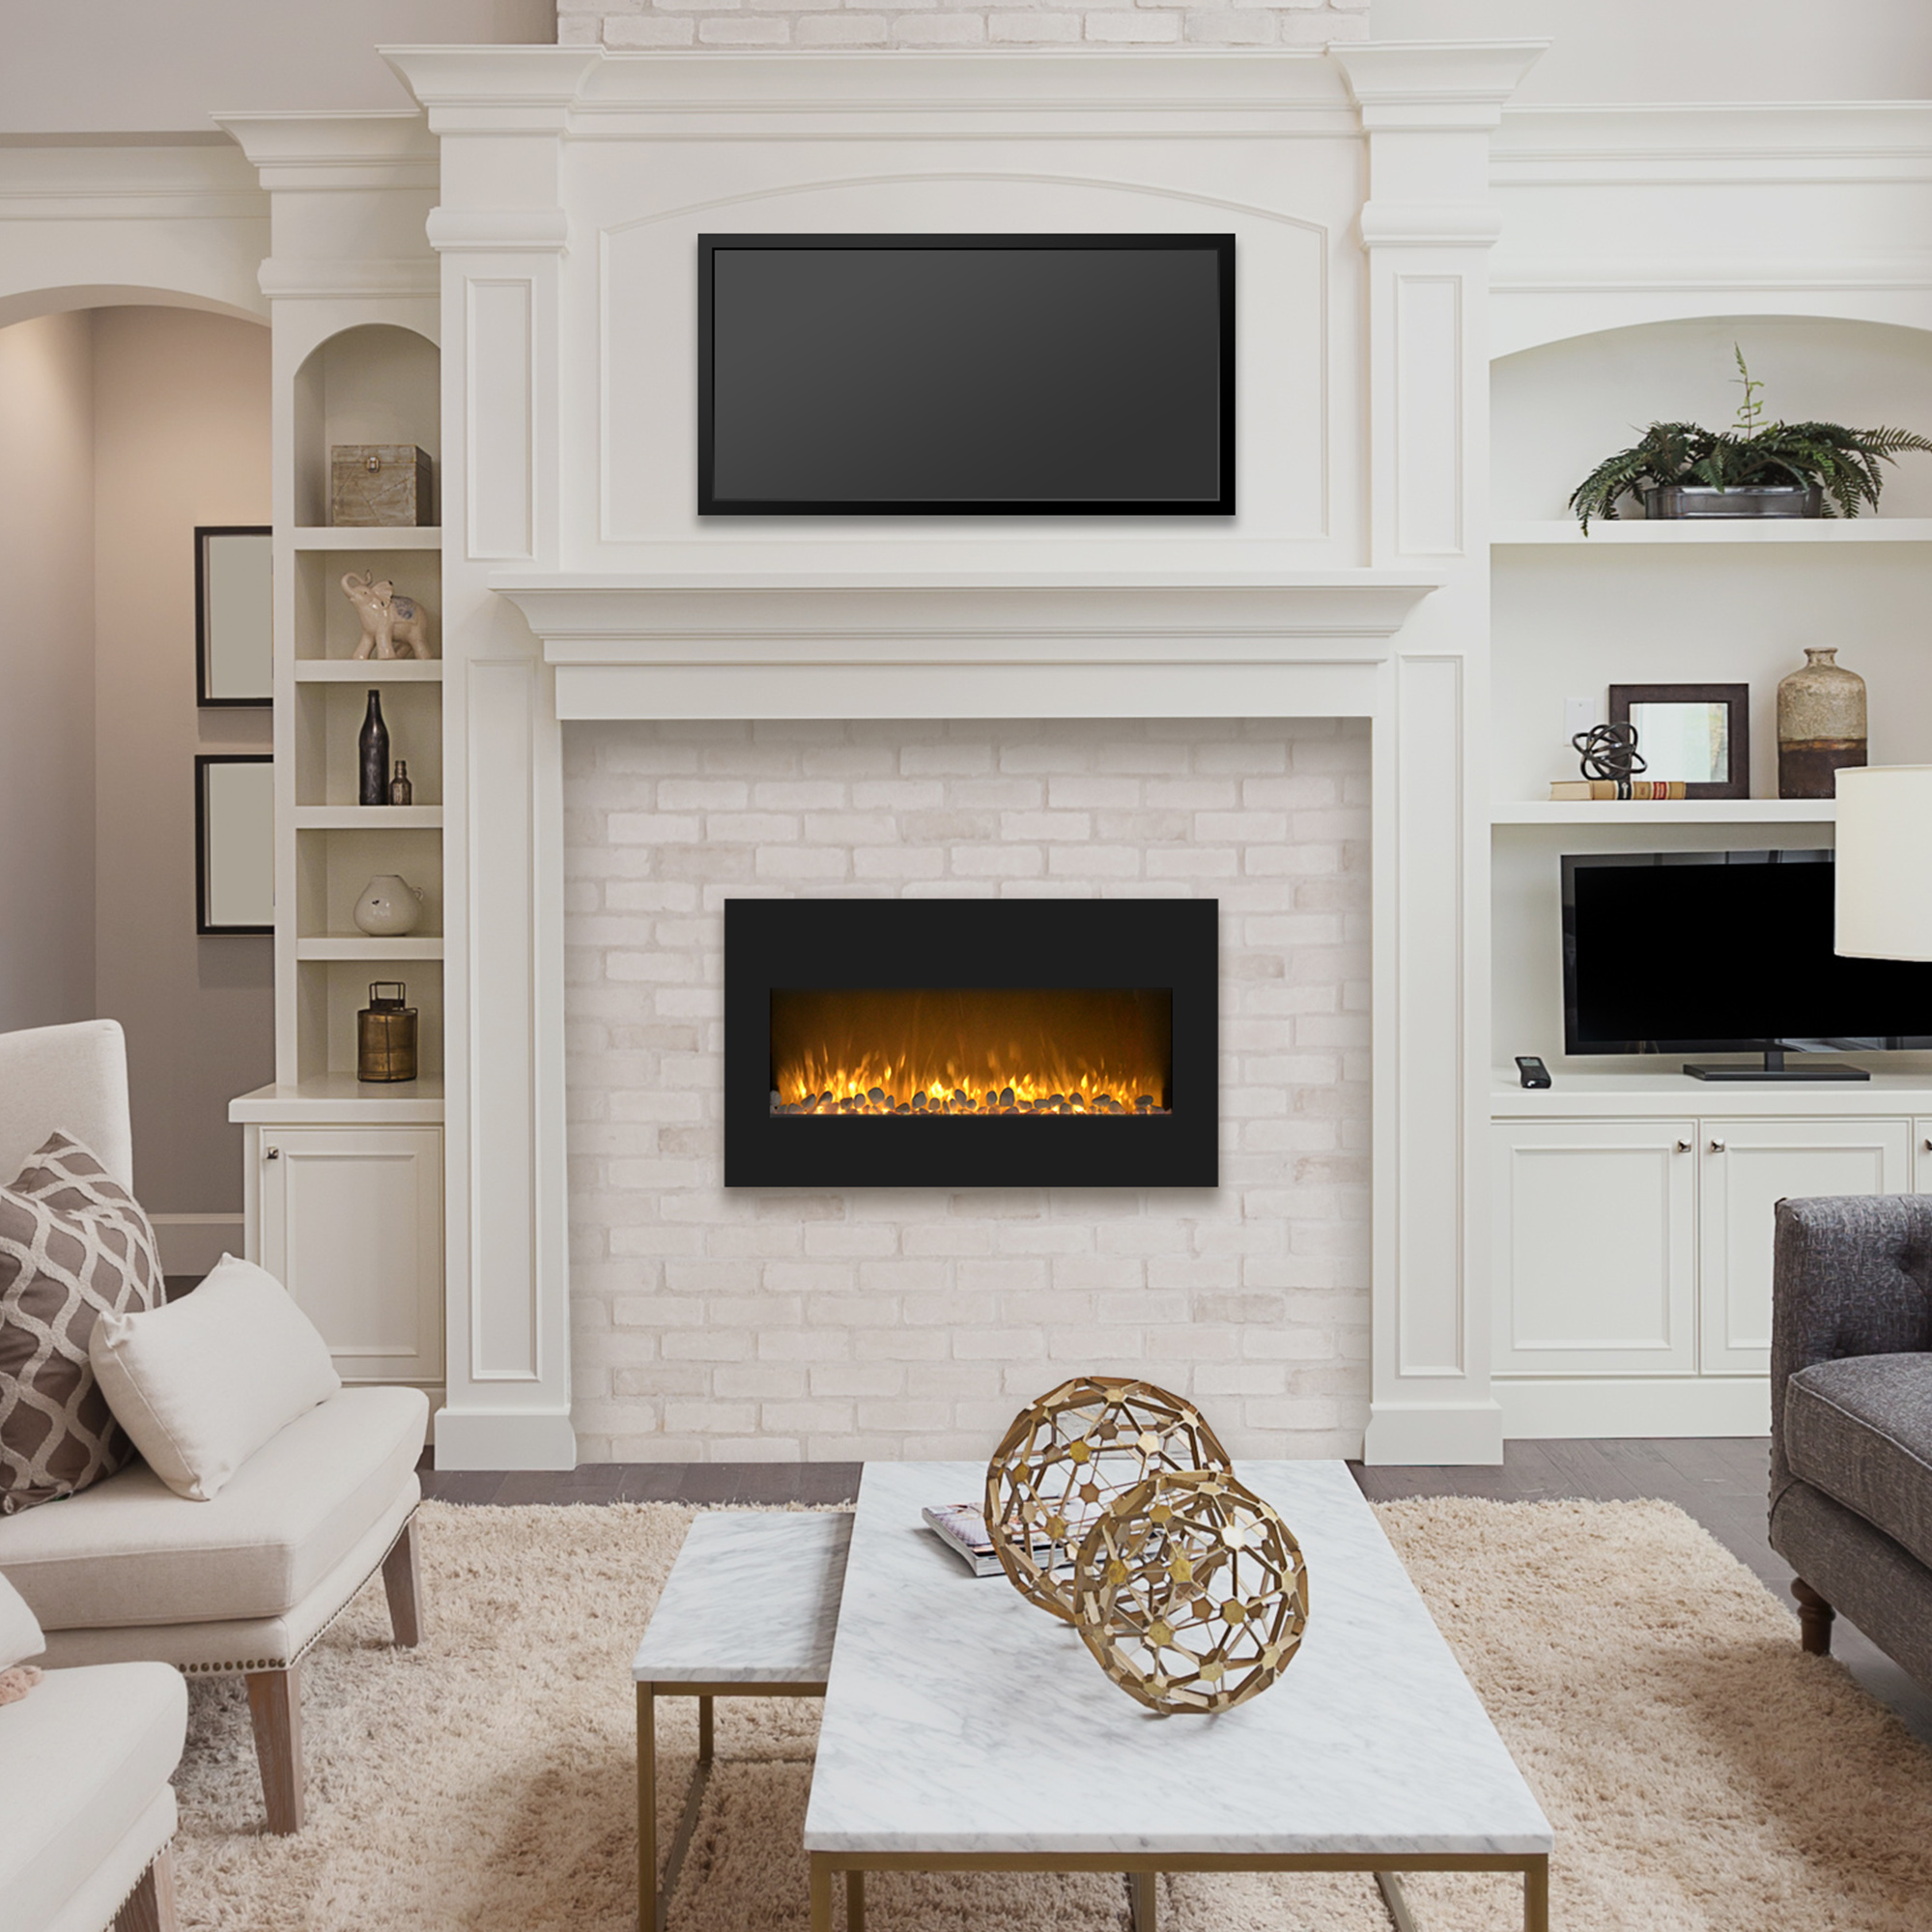 Northwest 36-inch Wall-Mount Modern Electric Fireplace with Remote, Black - image 3 of 5